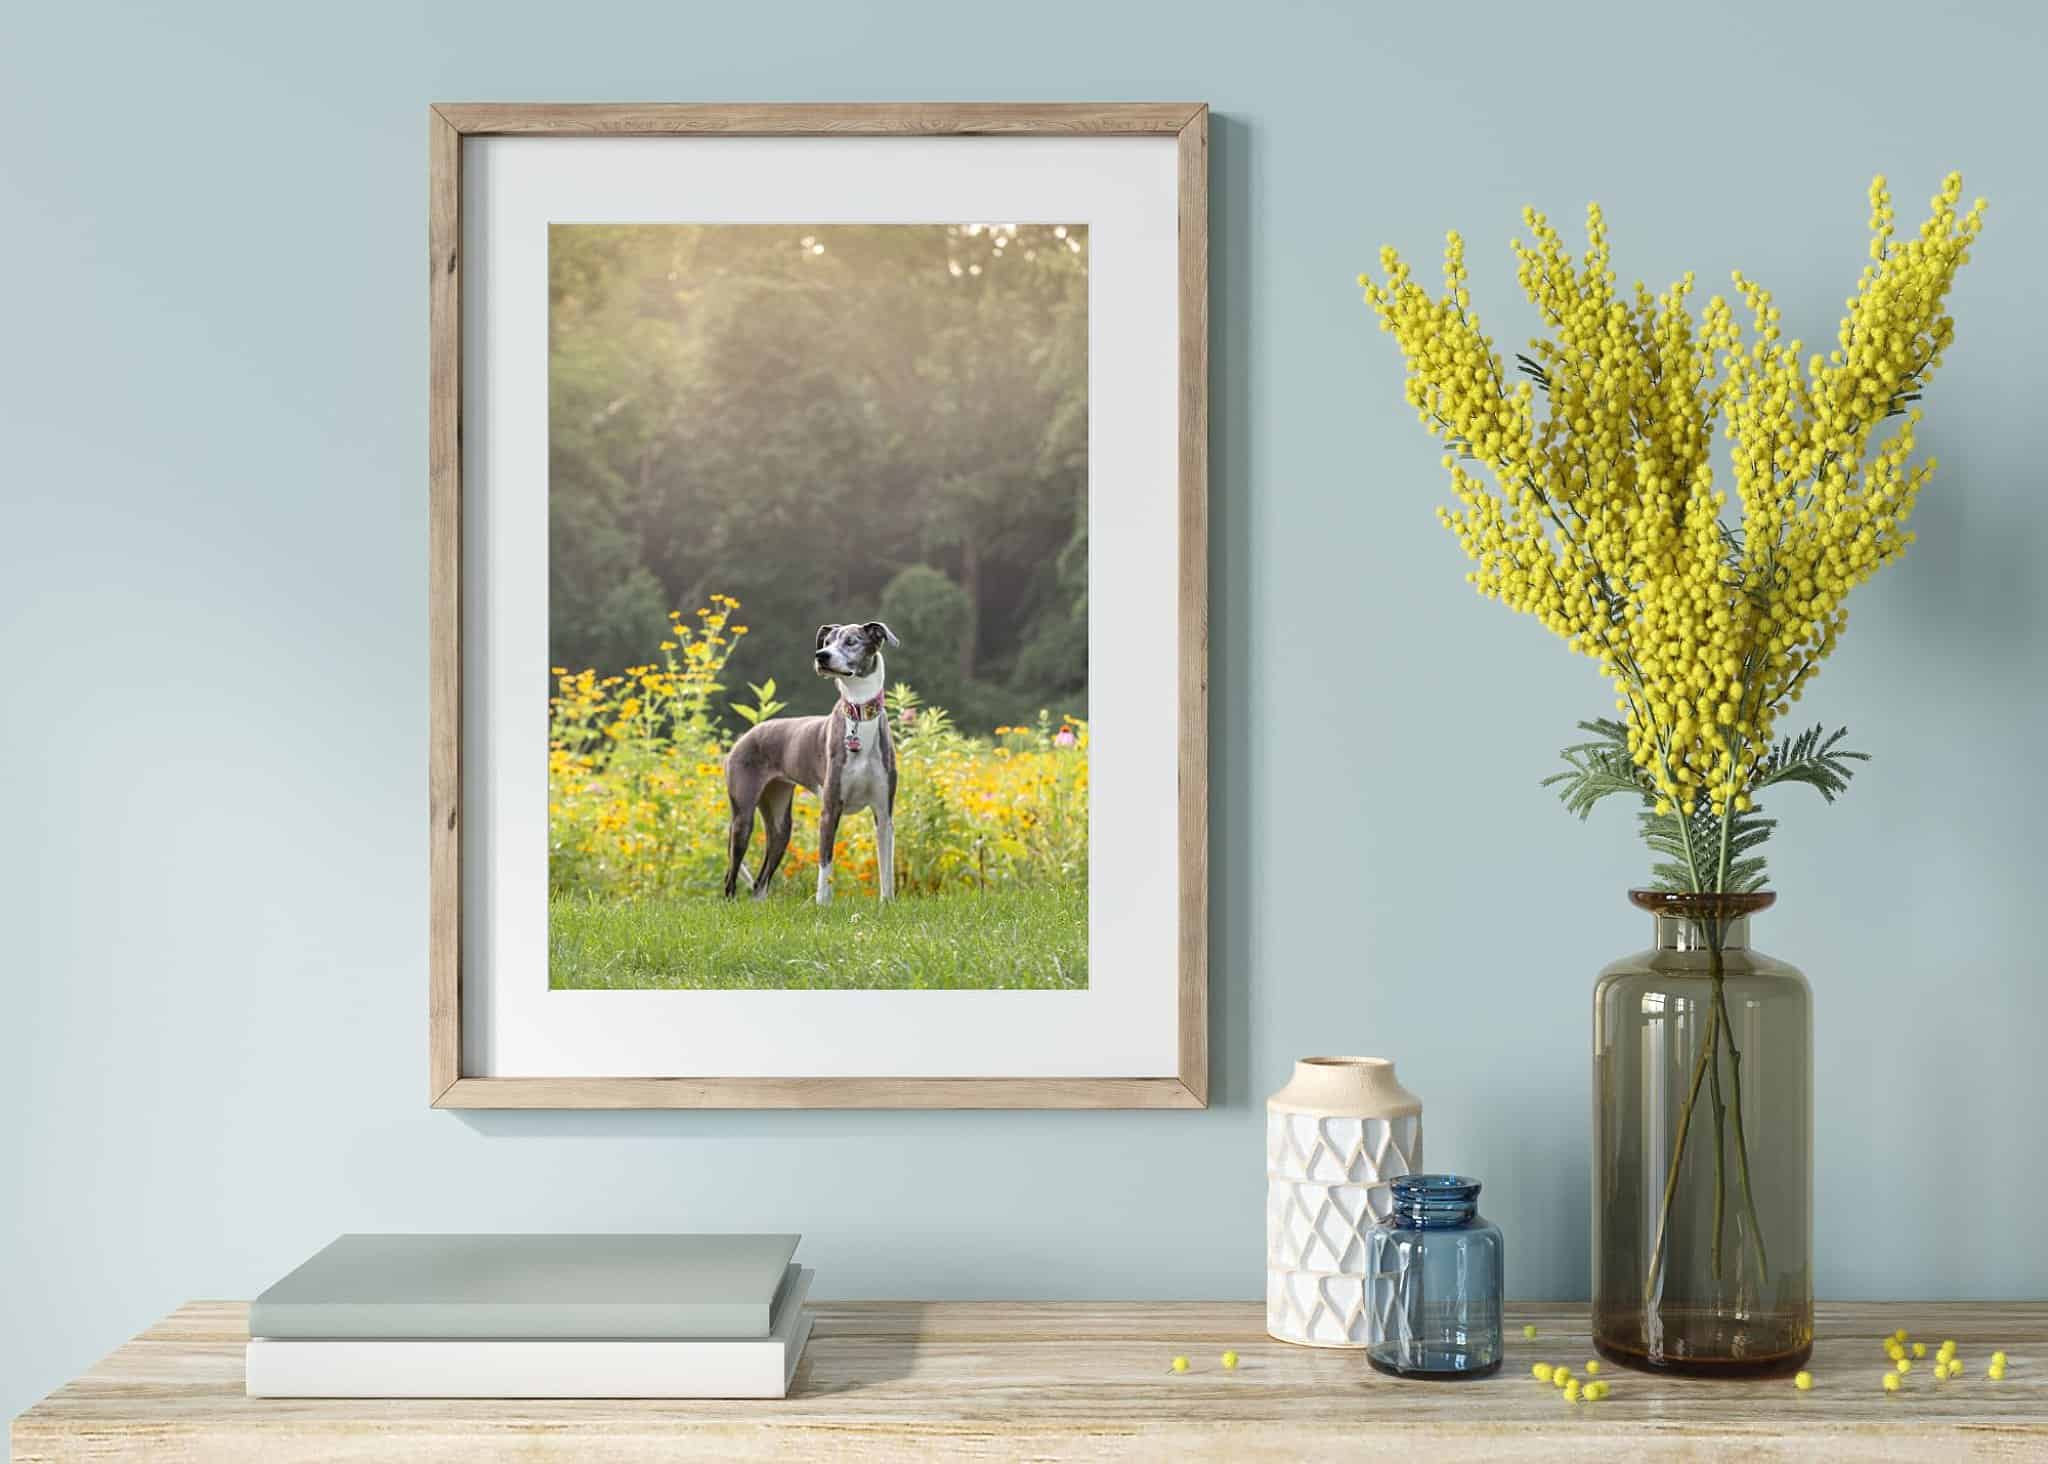 traditional framed print above an entry way table with a vase of yellow flowers